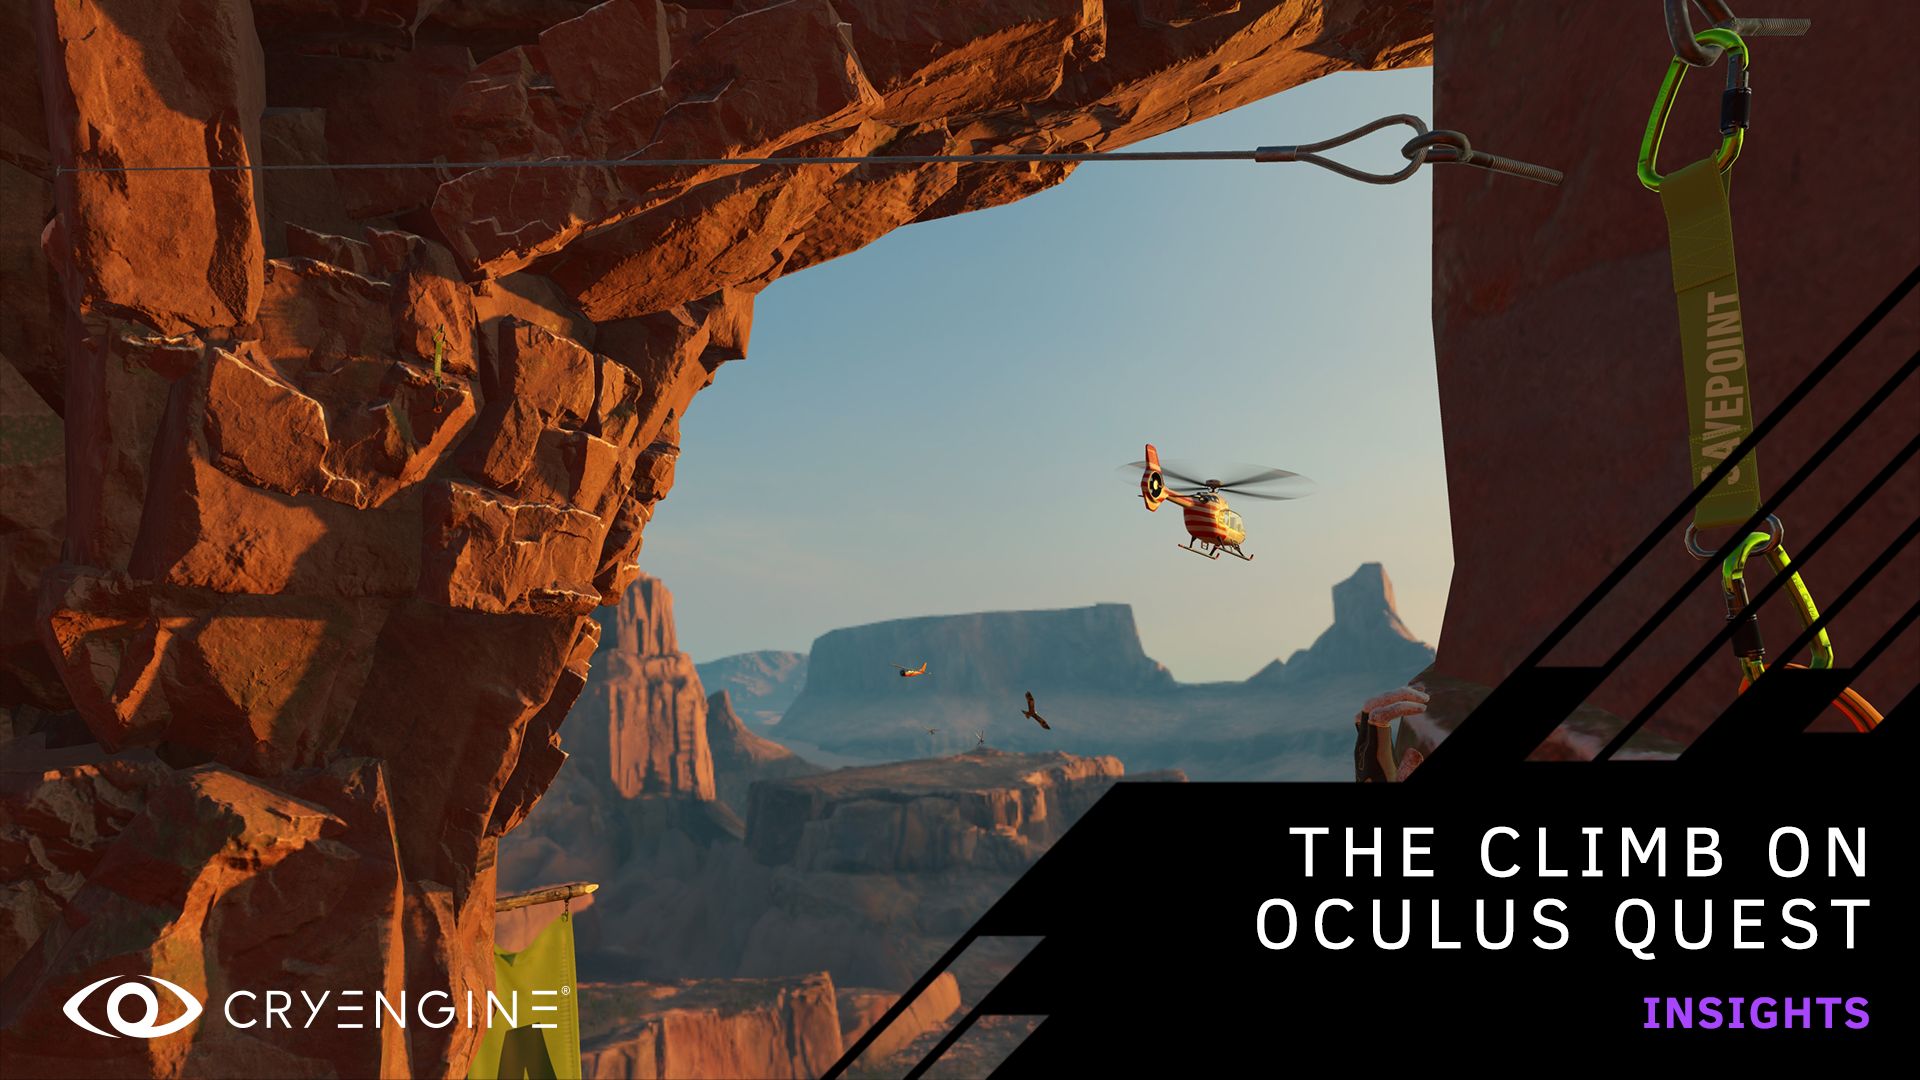 The Climb 2 Oculus Quest 2. Climb 2 VR Oculus. The Climb игра ВР. [VR Oculus Quest/Quest 2] the Climb. The difficult game about climbing